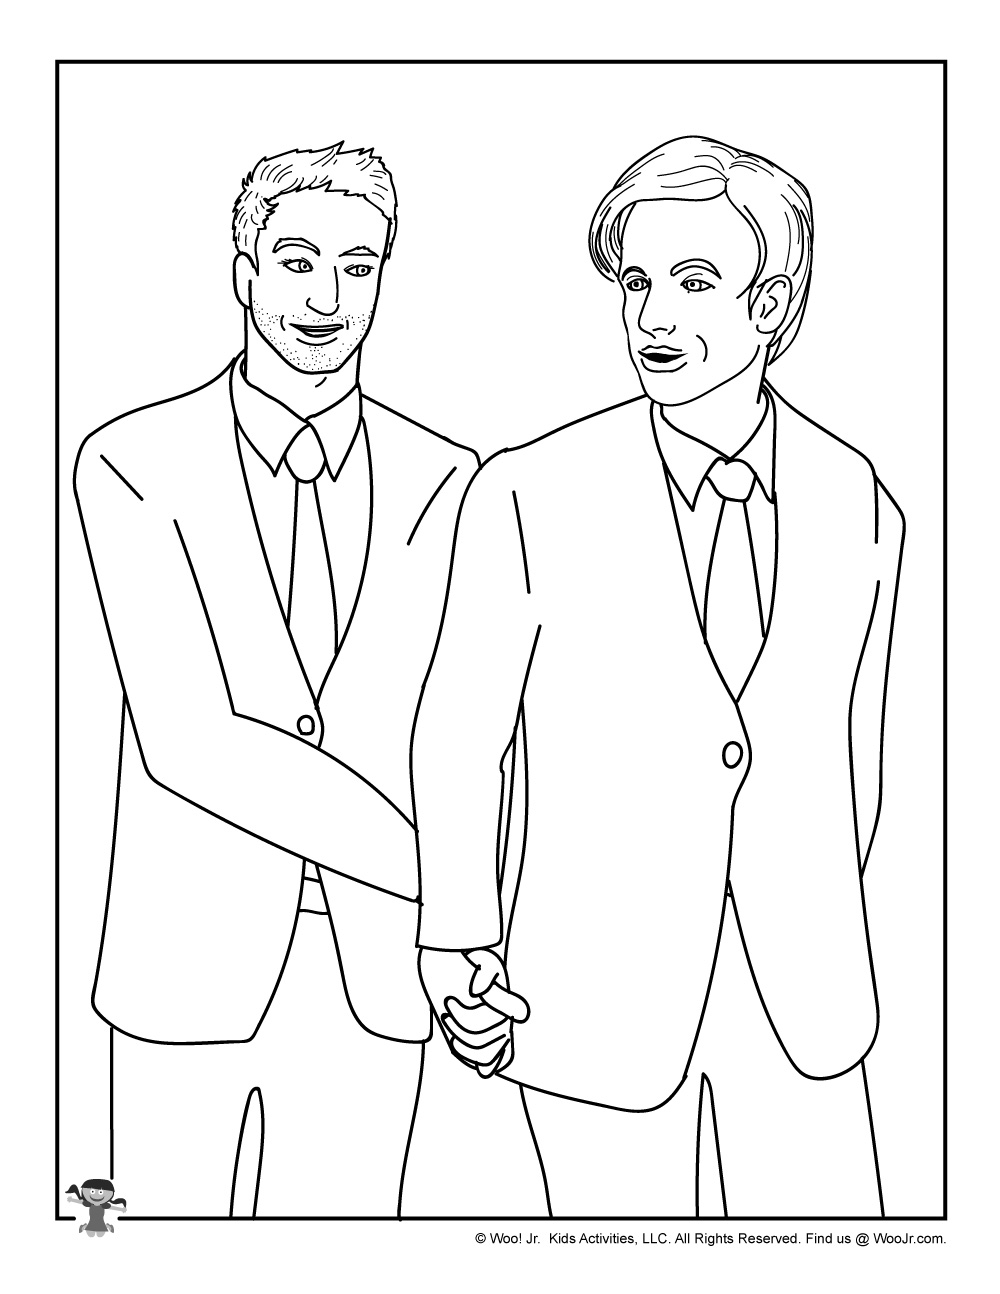 Gay-Wedding-Coloring-Page-for-Kids | Woo! Jr. Kids Activities : Children's  Publishing